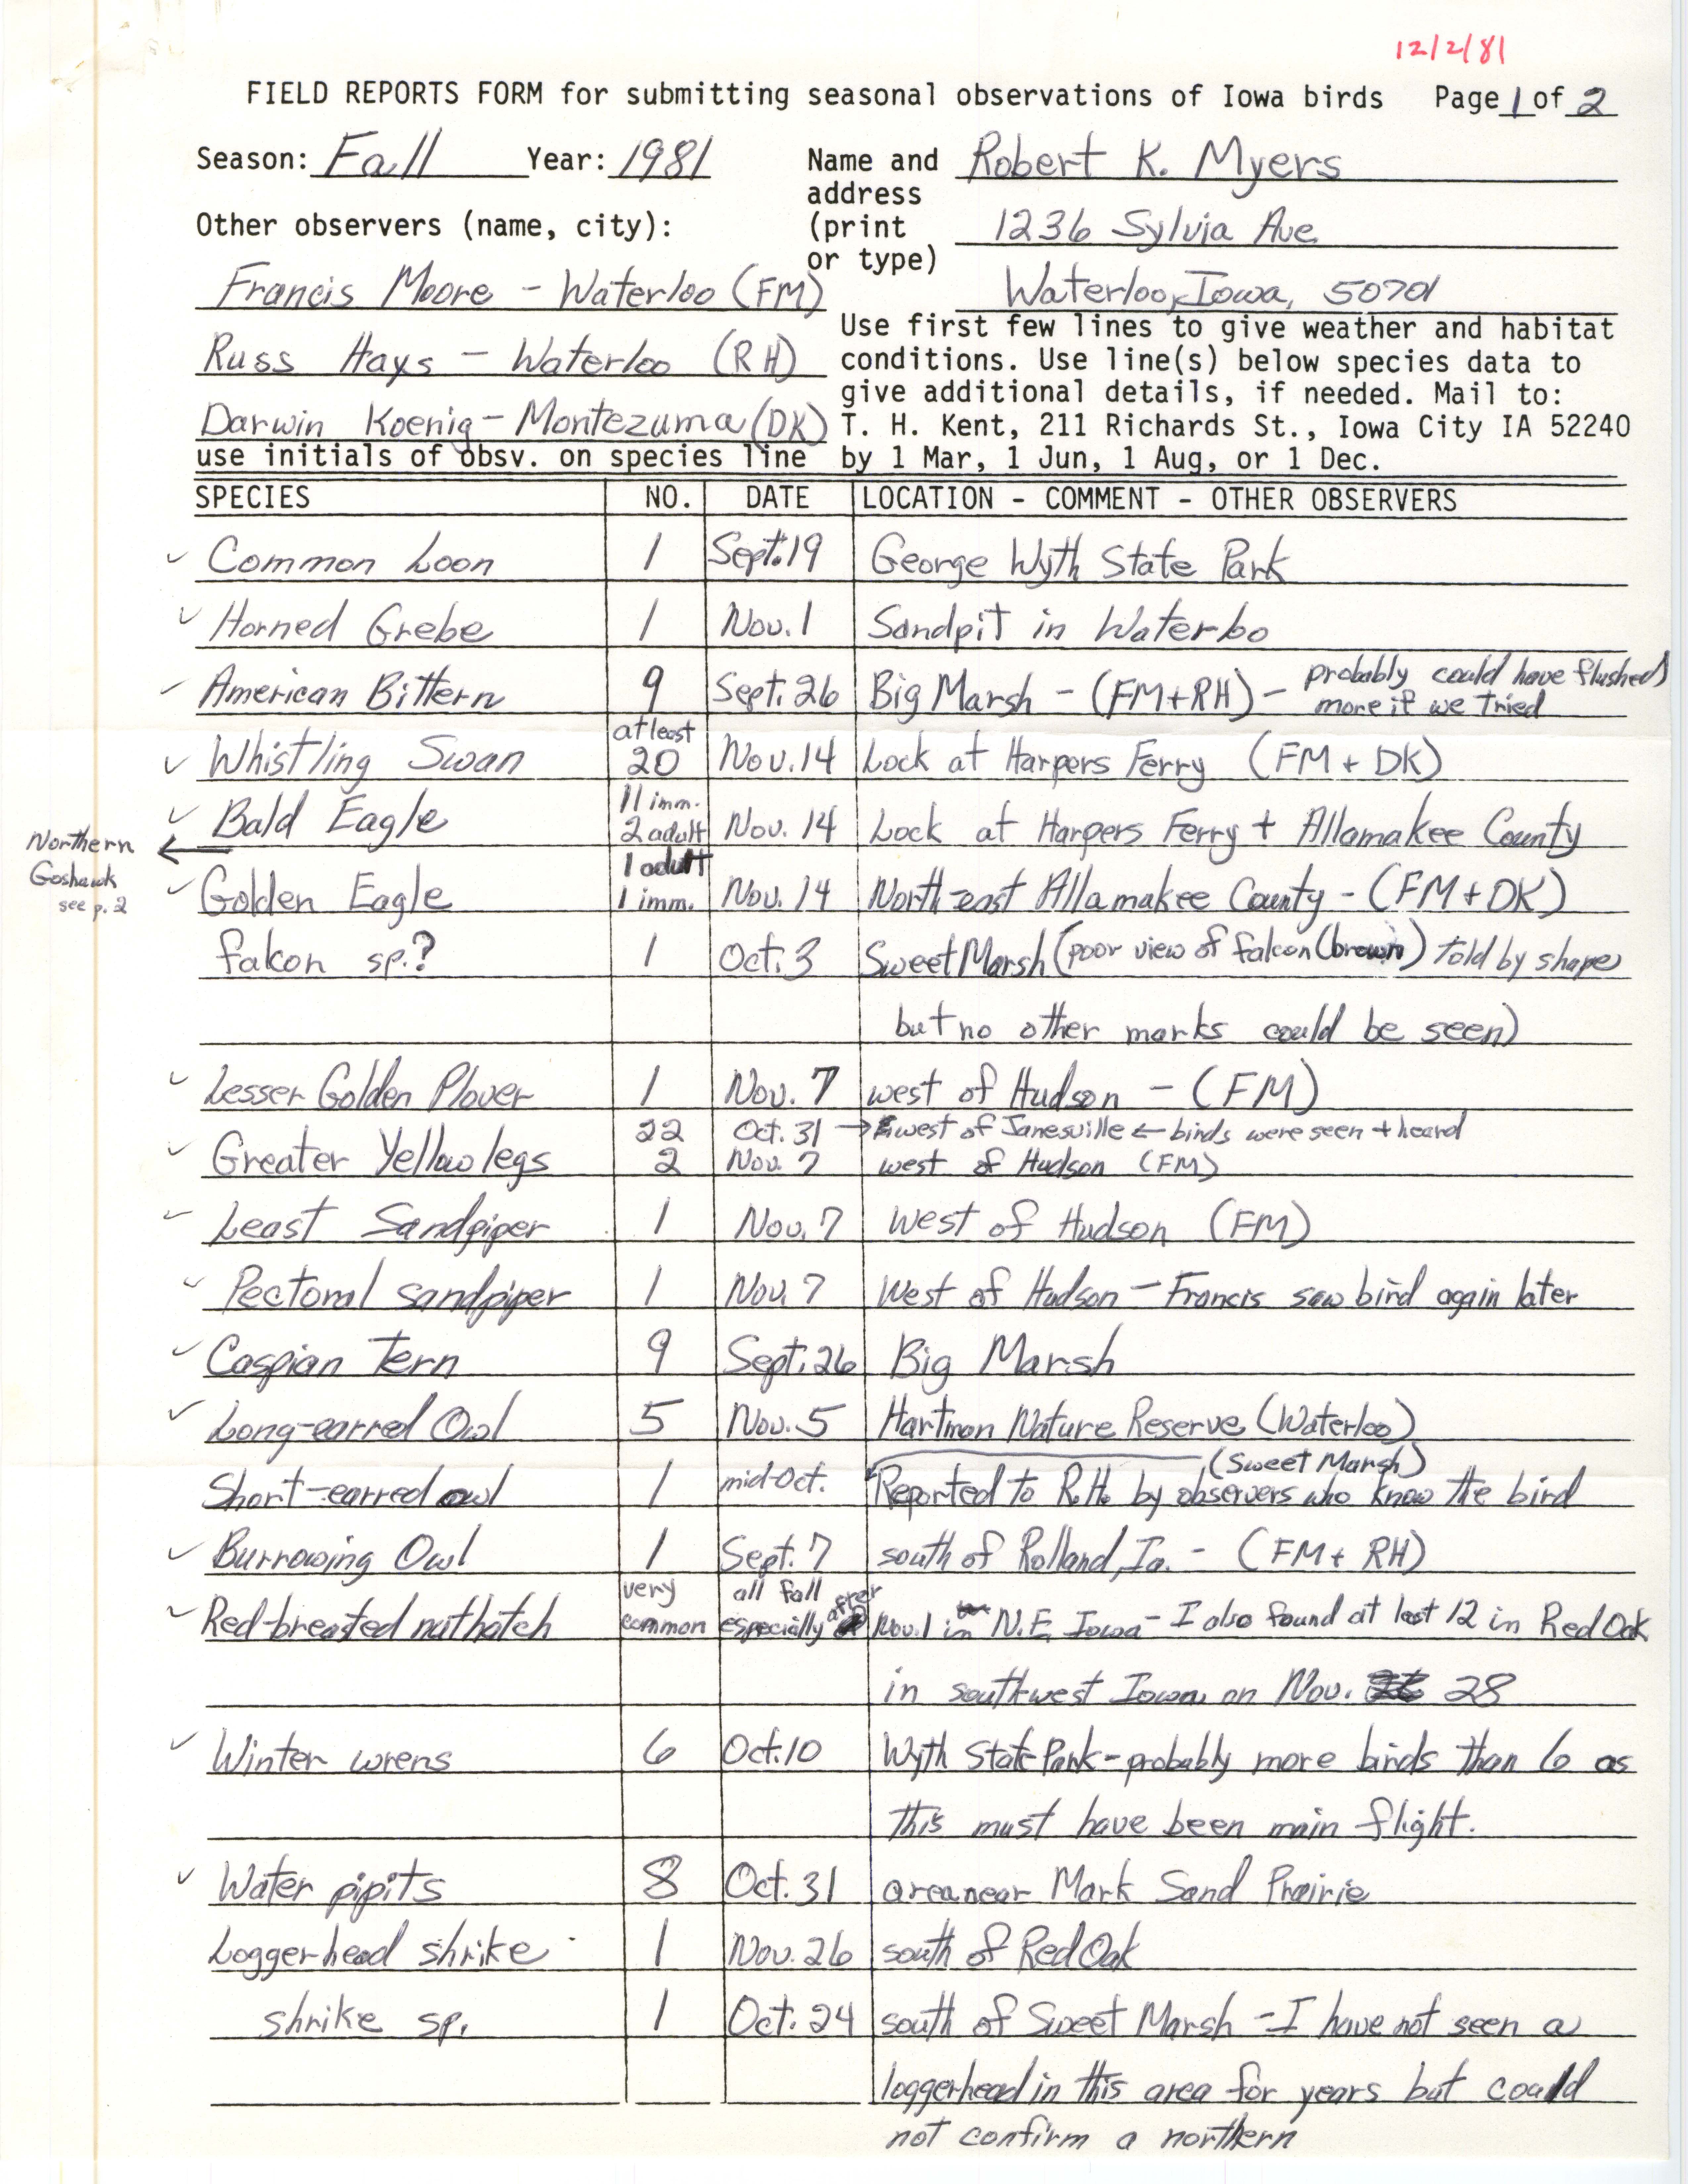 Field notes contributed by Robert K. Myers, December 2, 1981